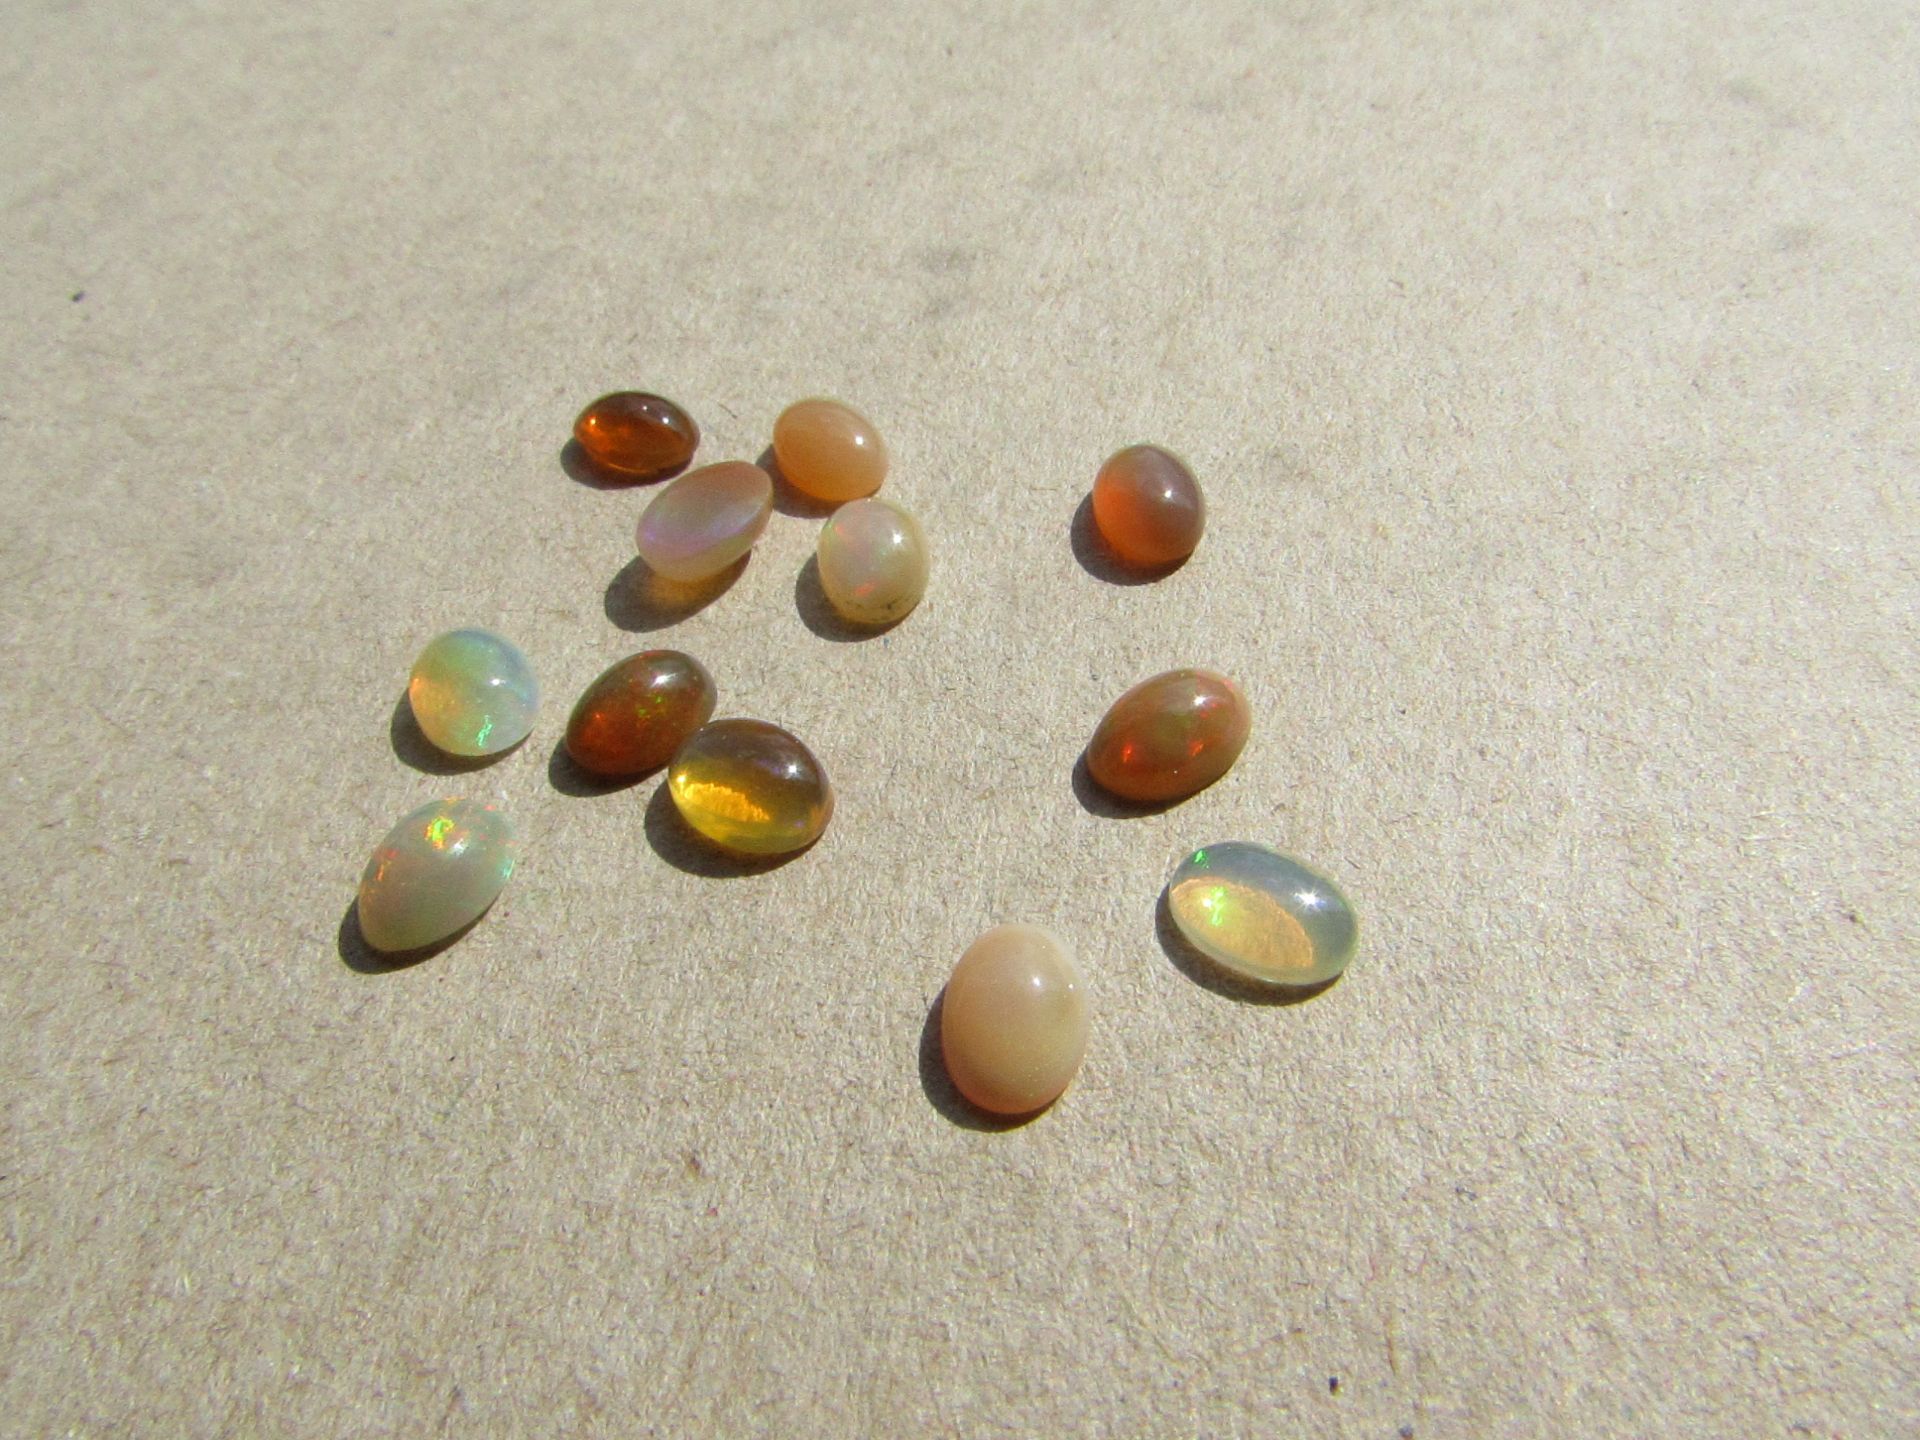 An amazing collection of Natural Ethiopia Opal Gemstones, 6.00 carat, 12 pieces. Perfect for